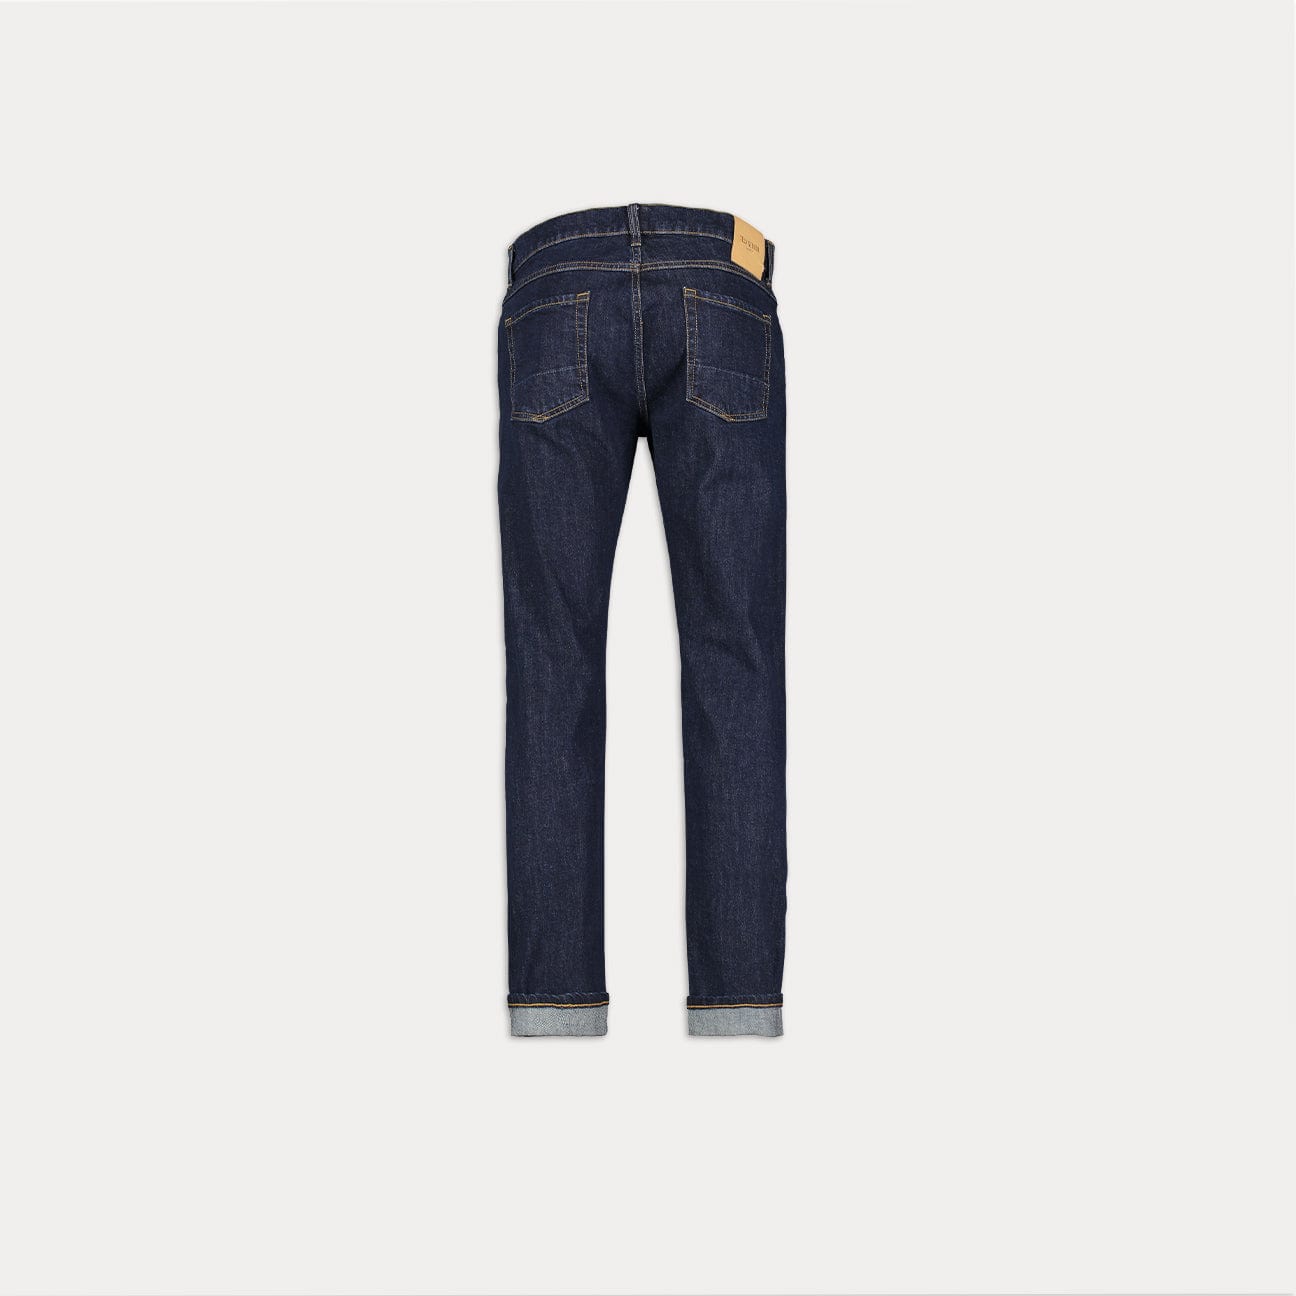 Jeans Augusto selvedge washed Blue